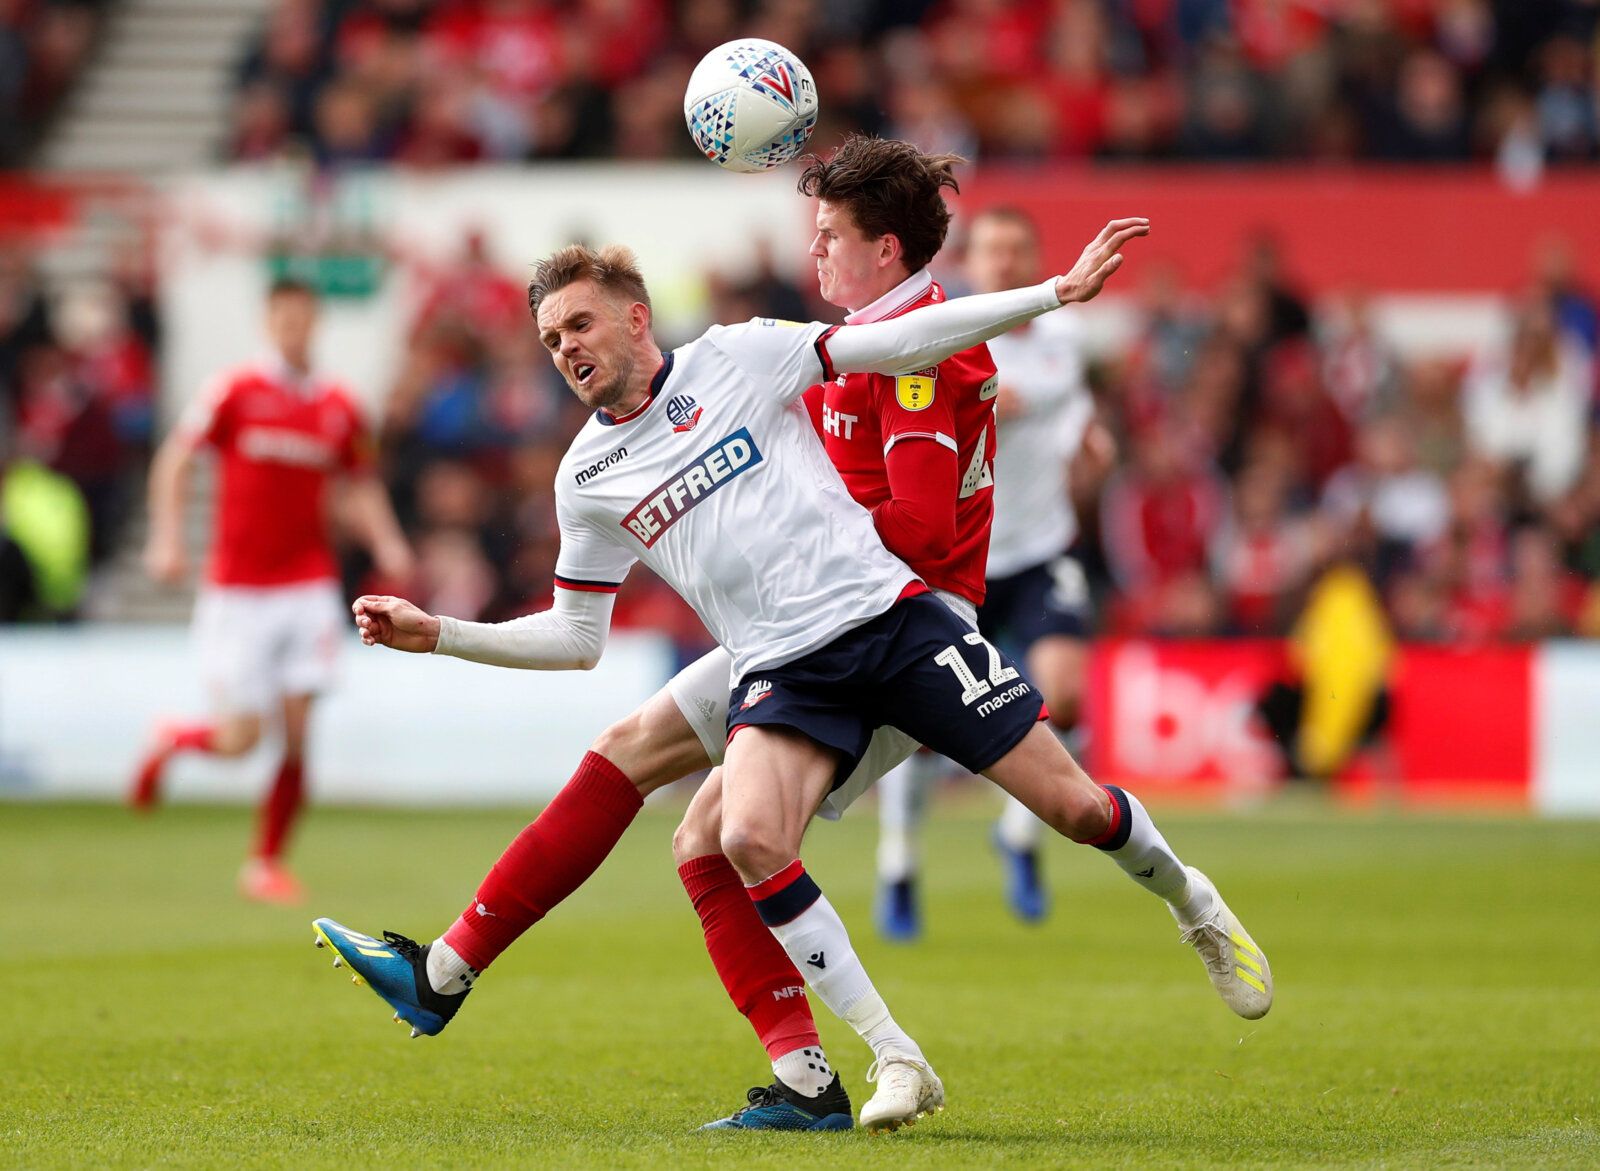 Soccer Football - Championship - Nottingham Forest v Bolton Wanderers - The City Ground, Nottingham, Britain - May 5, 2019   Nottingham Forest's Sam Byram in action with Bolton Wanderers' Craig Noone   Action Images/Peter Cziborra    EDITORIAL USE ONLY. No use with unauthorized audio, video, data, fixture lists, club/league logos or 